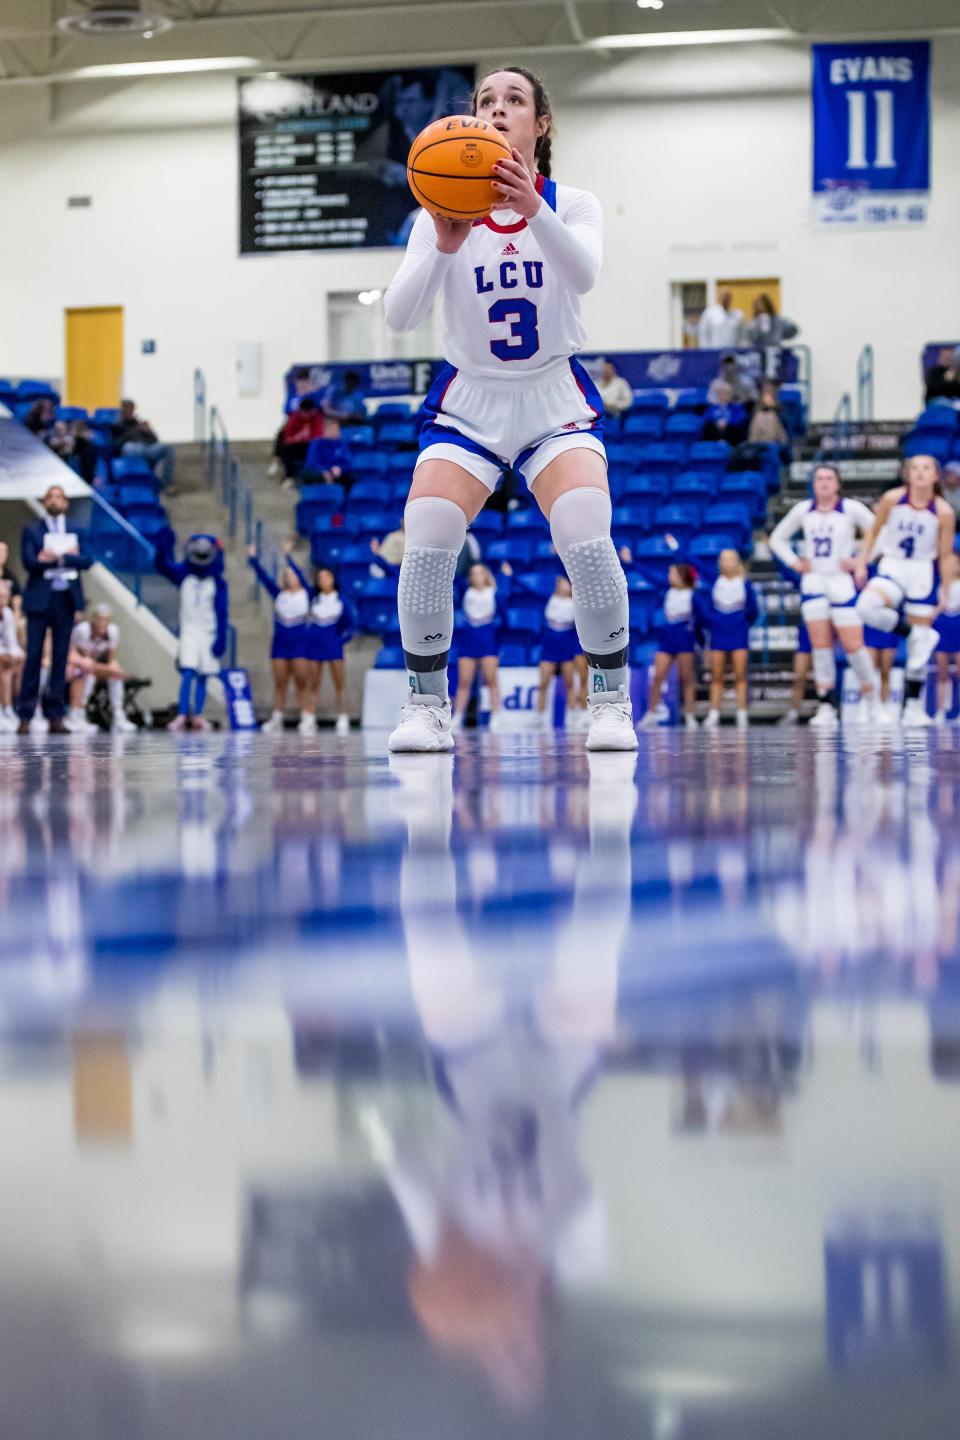 Audrey Robertson (3), pictured in a game Thursday, scored 10 points Saturday to help Lubbock Christian University beat St. Mary's 60-46 in Lone Star Conference basketball at the Rip Griffin Center.